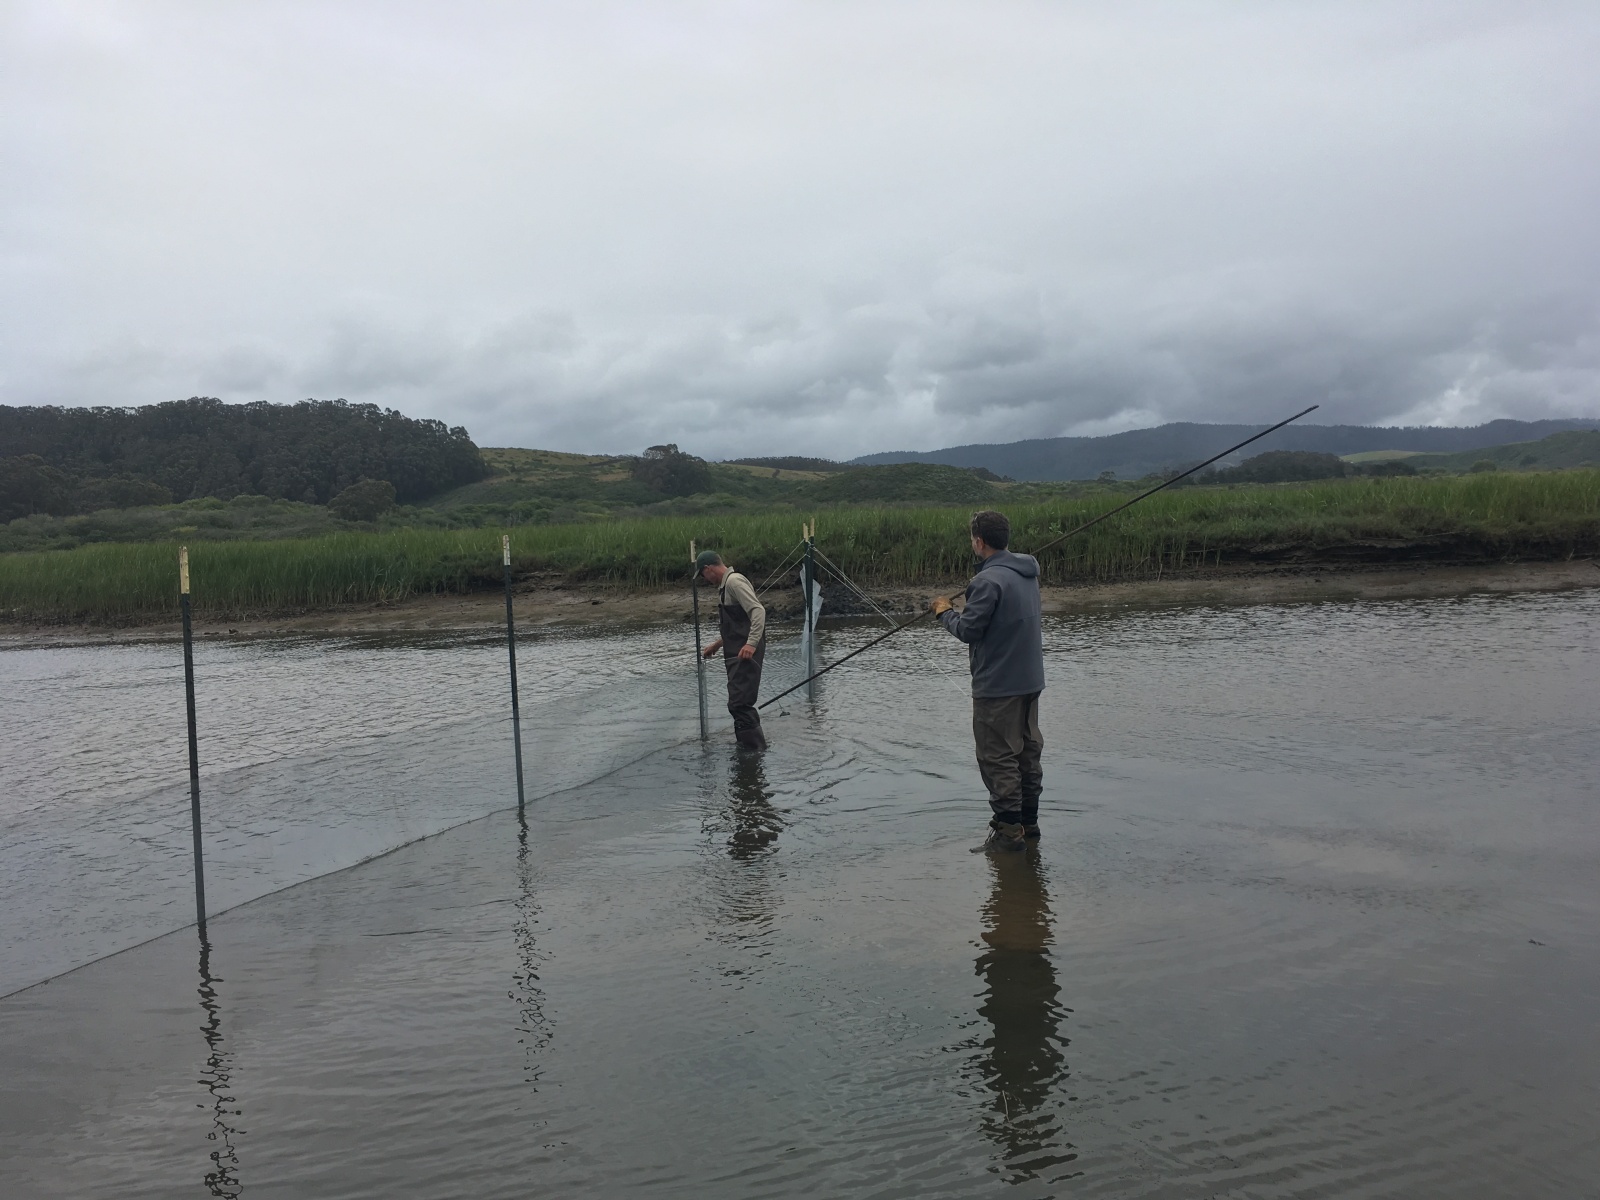 Setting up exclusion fencing to keep fish out of the work area. May 2019